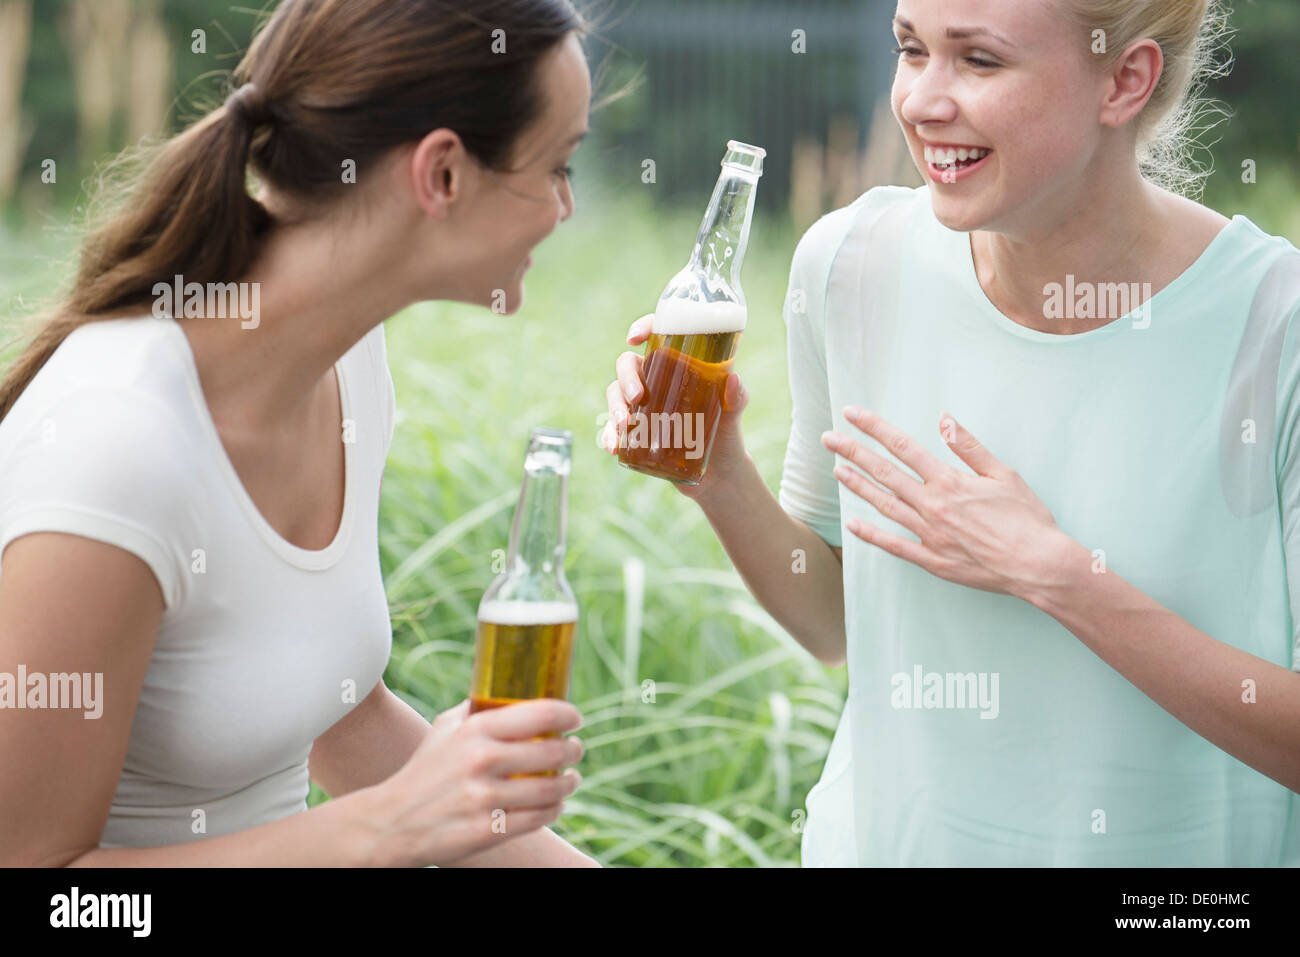 Women drinking beer together Stock Photo